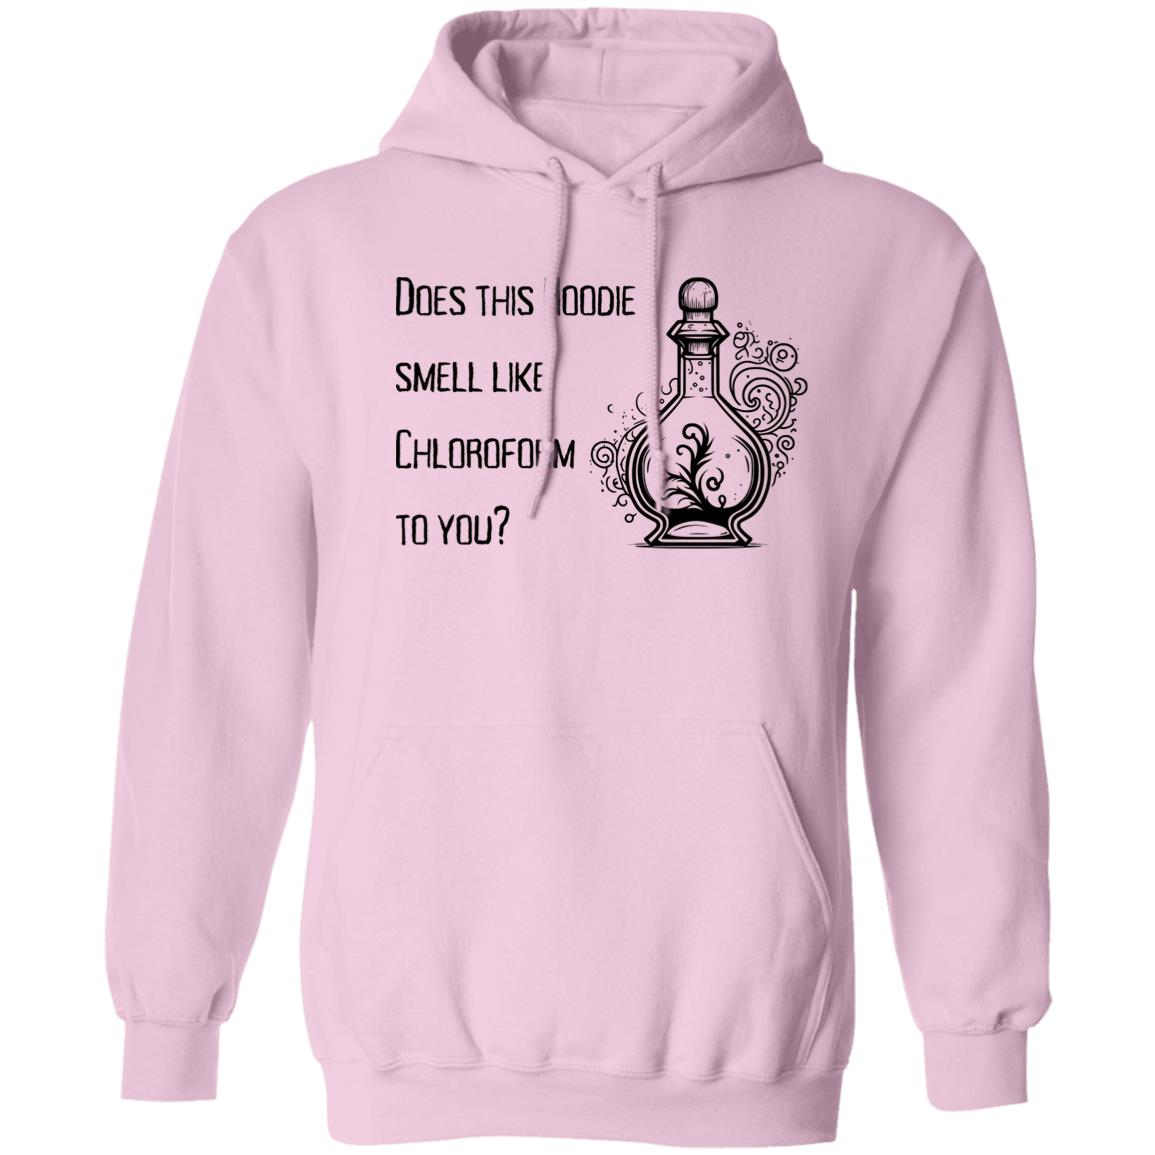 Does This Hoodie Smell Like Chloroform To You Does This Hoodie Smell Like Chloroform to You? Hoodie Sweatshirt